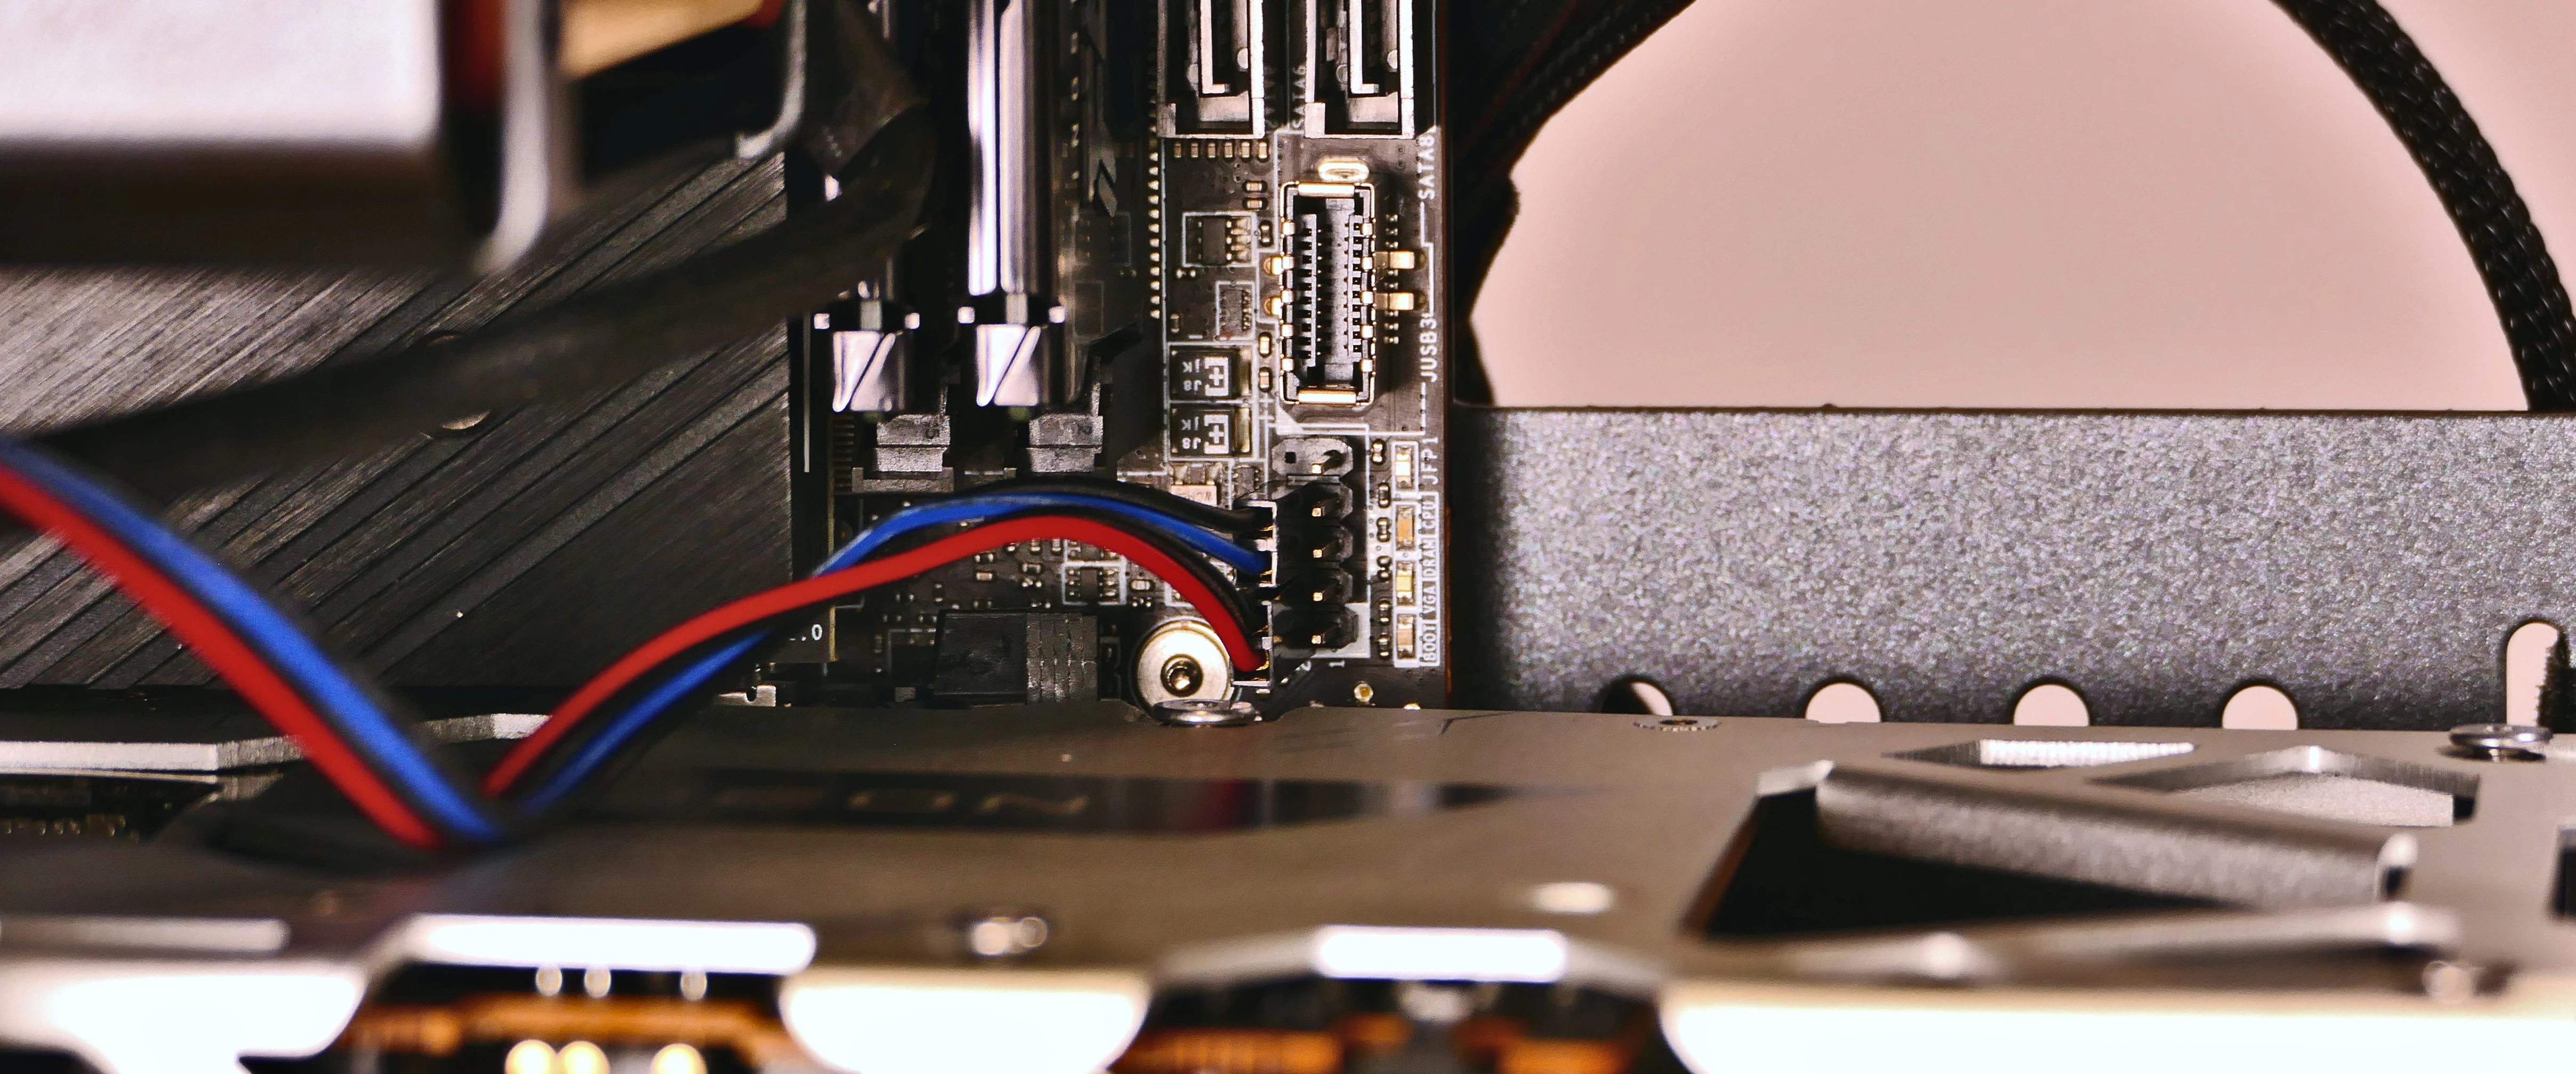 Power LED & power switch headers on motherboard